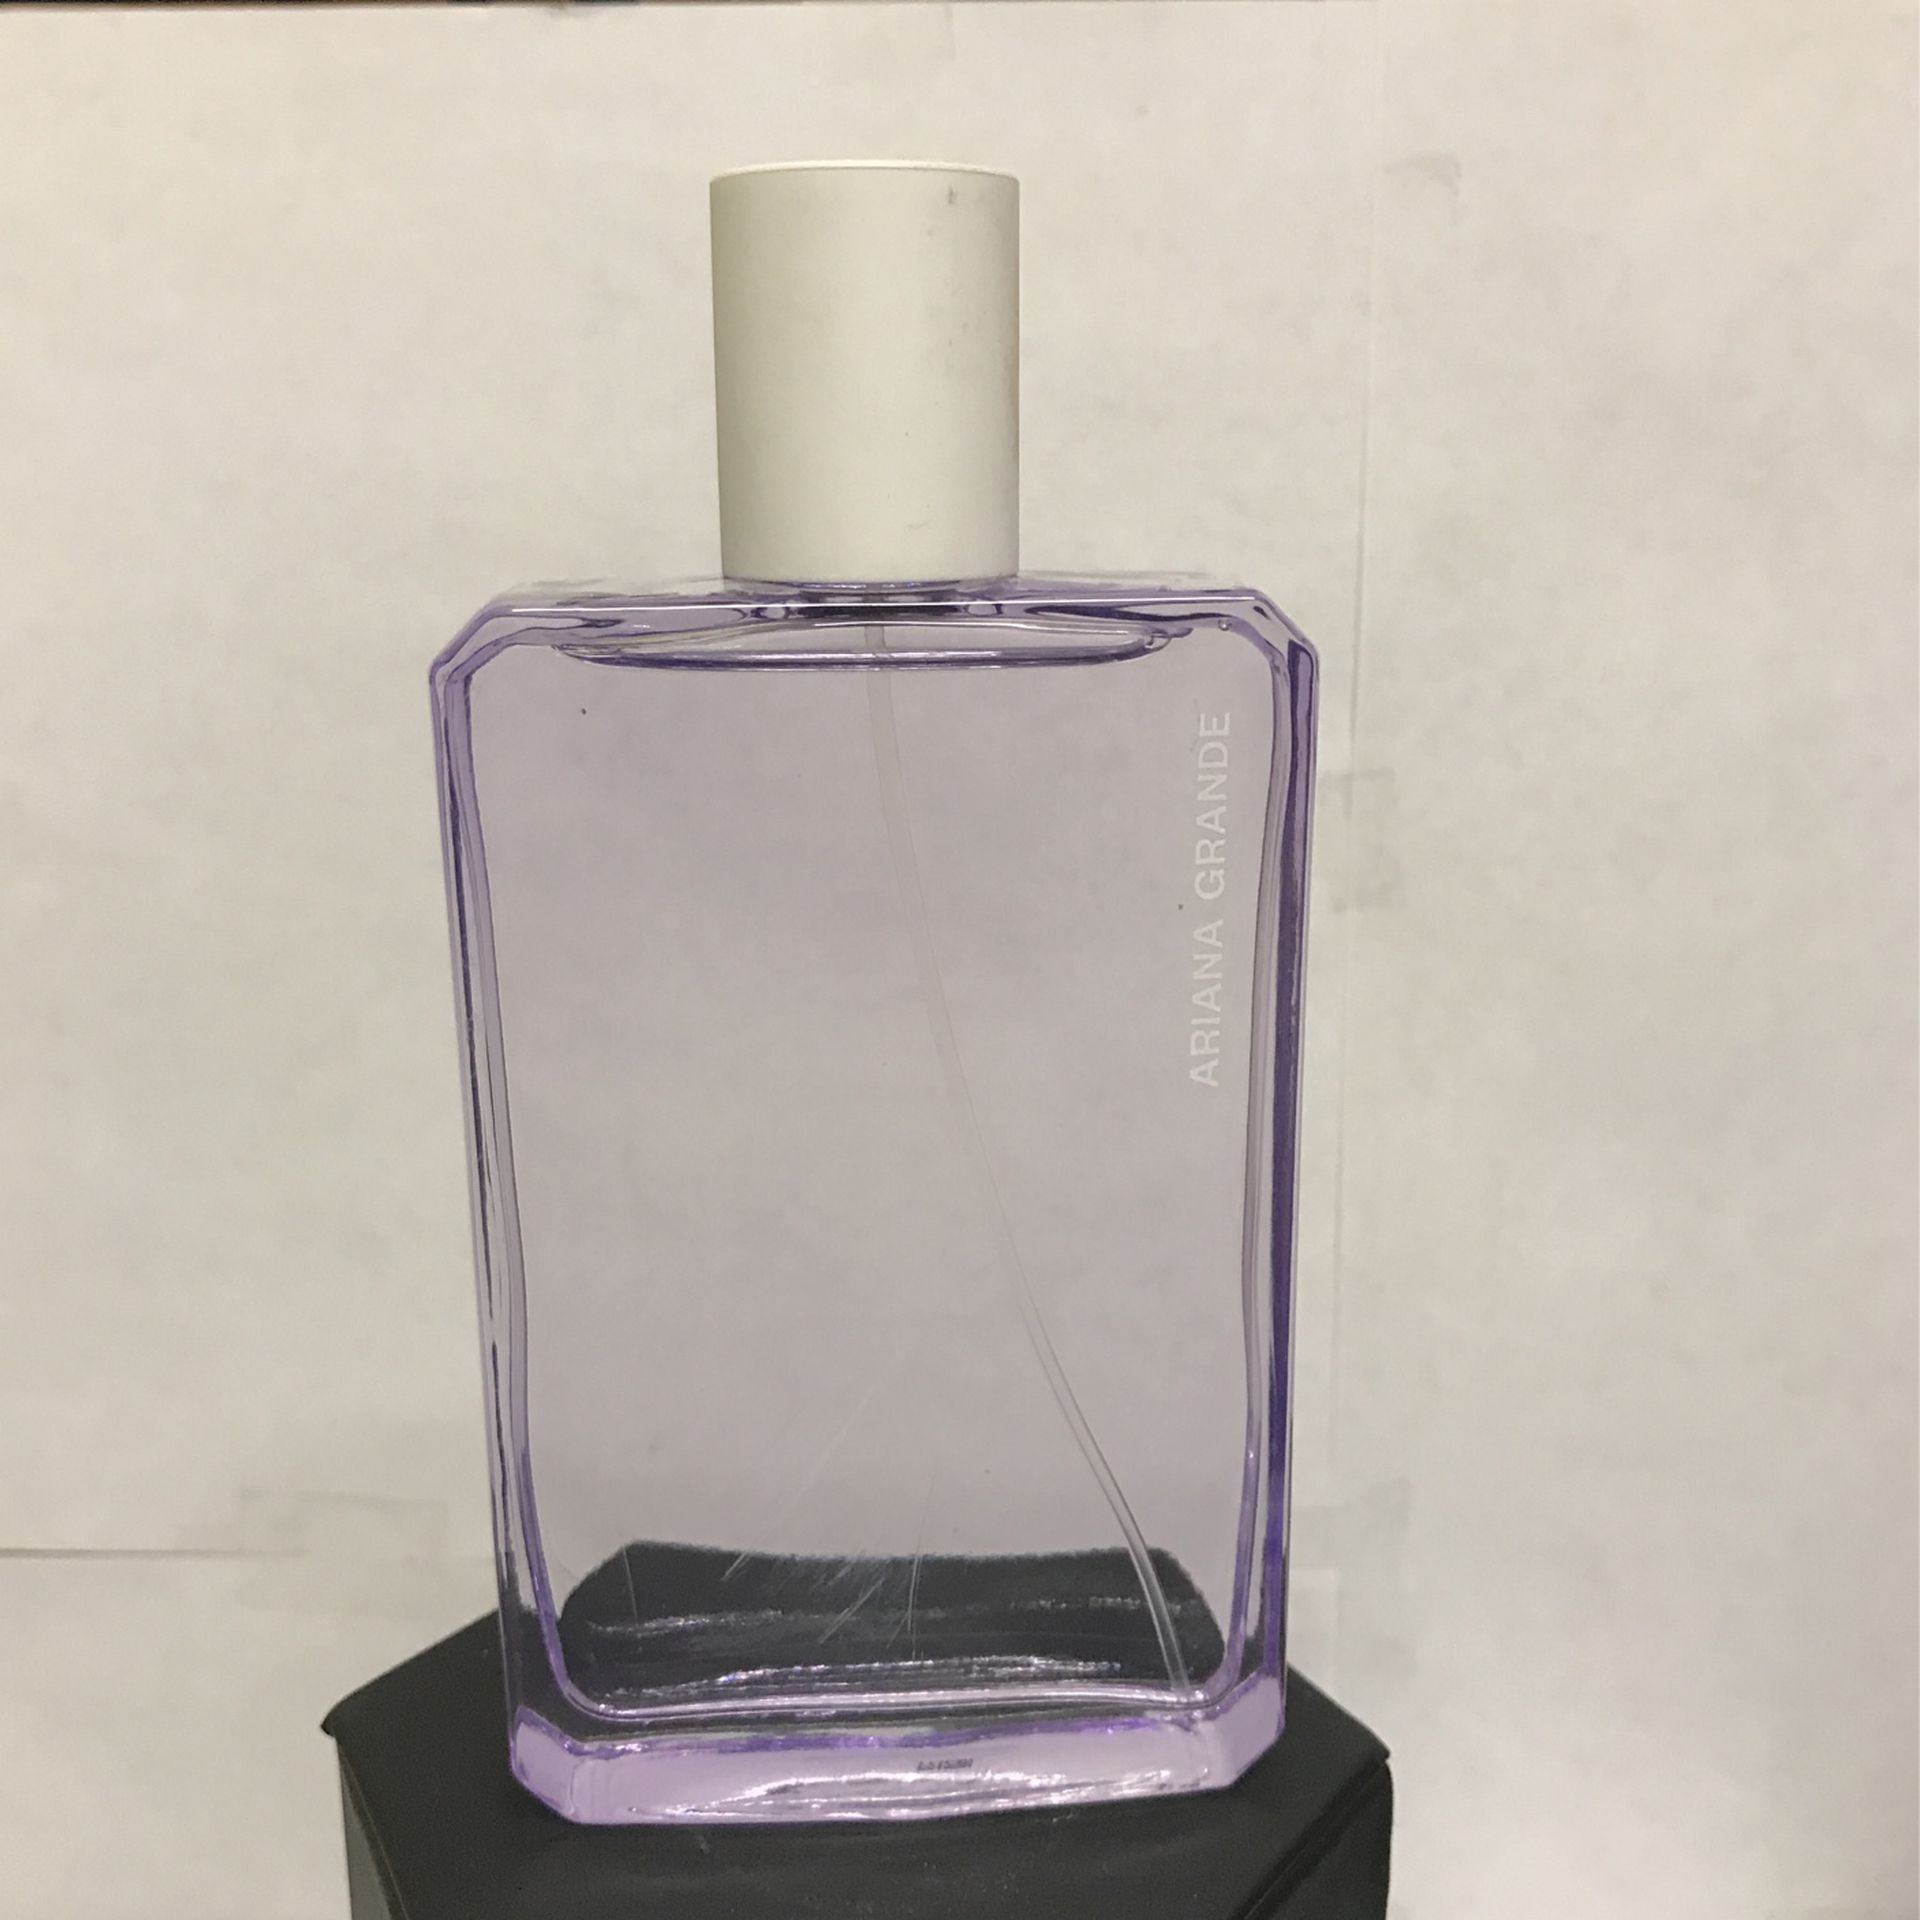 Ariana Grande Perfume for Sale in Rancho Cucamonga, CA - OfferUp